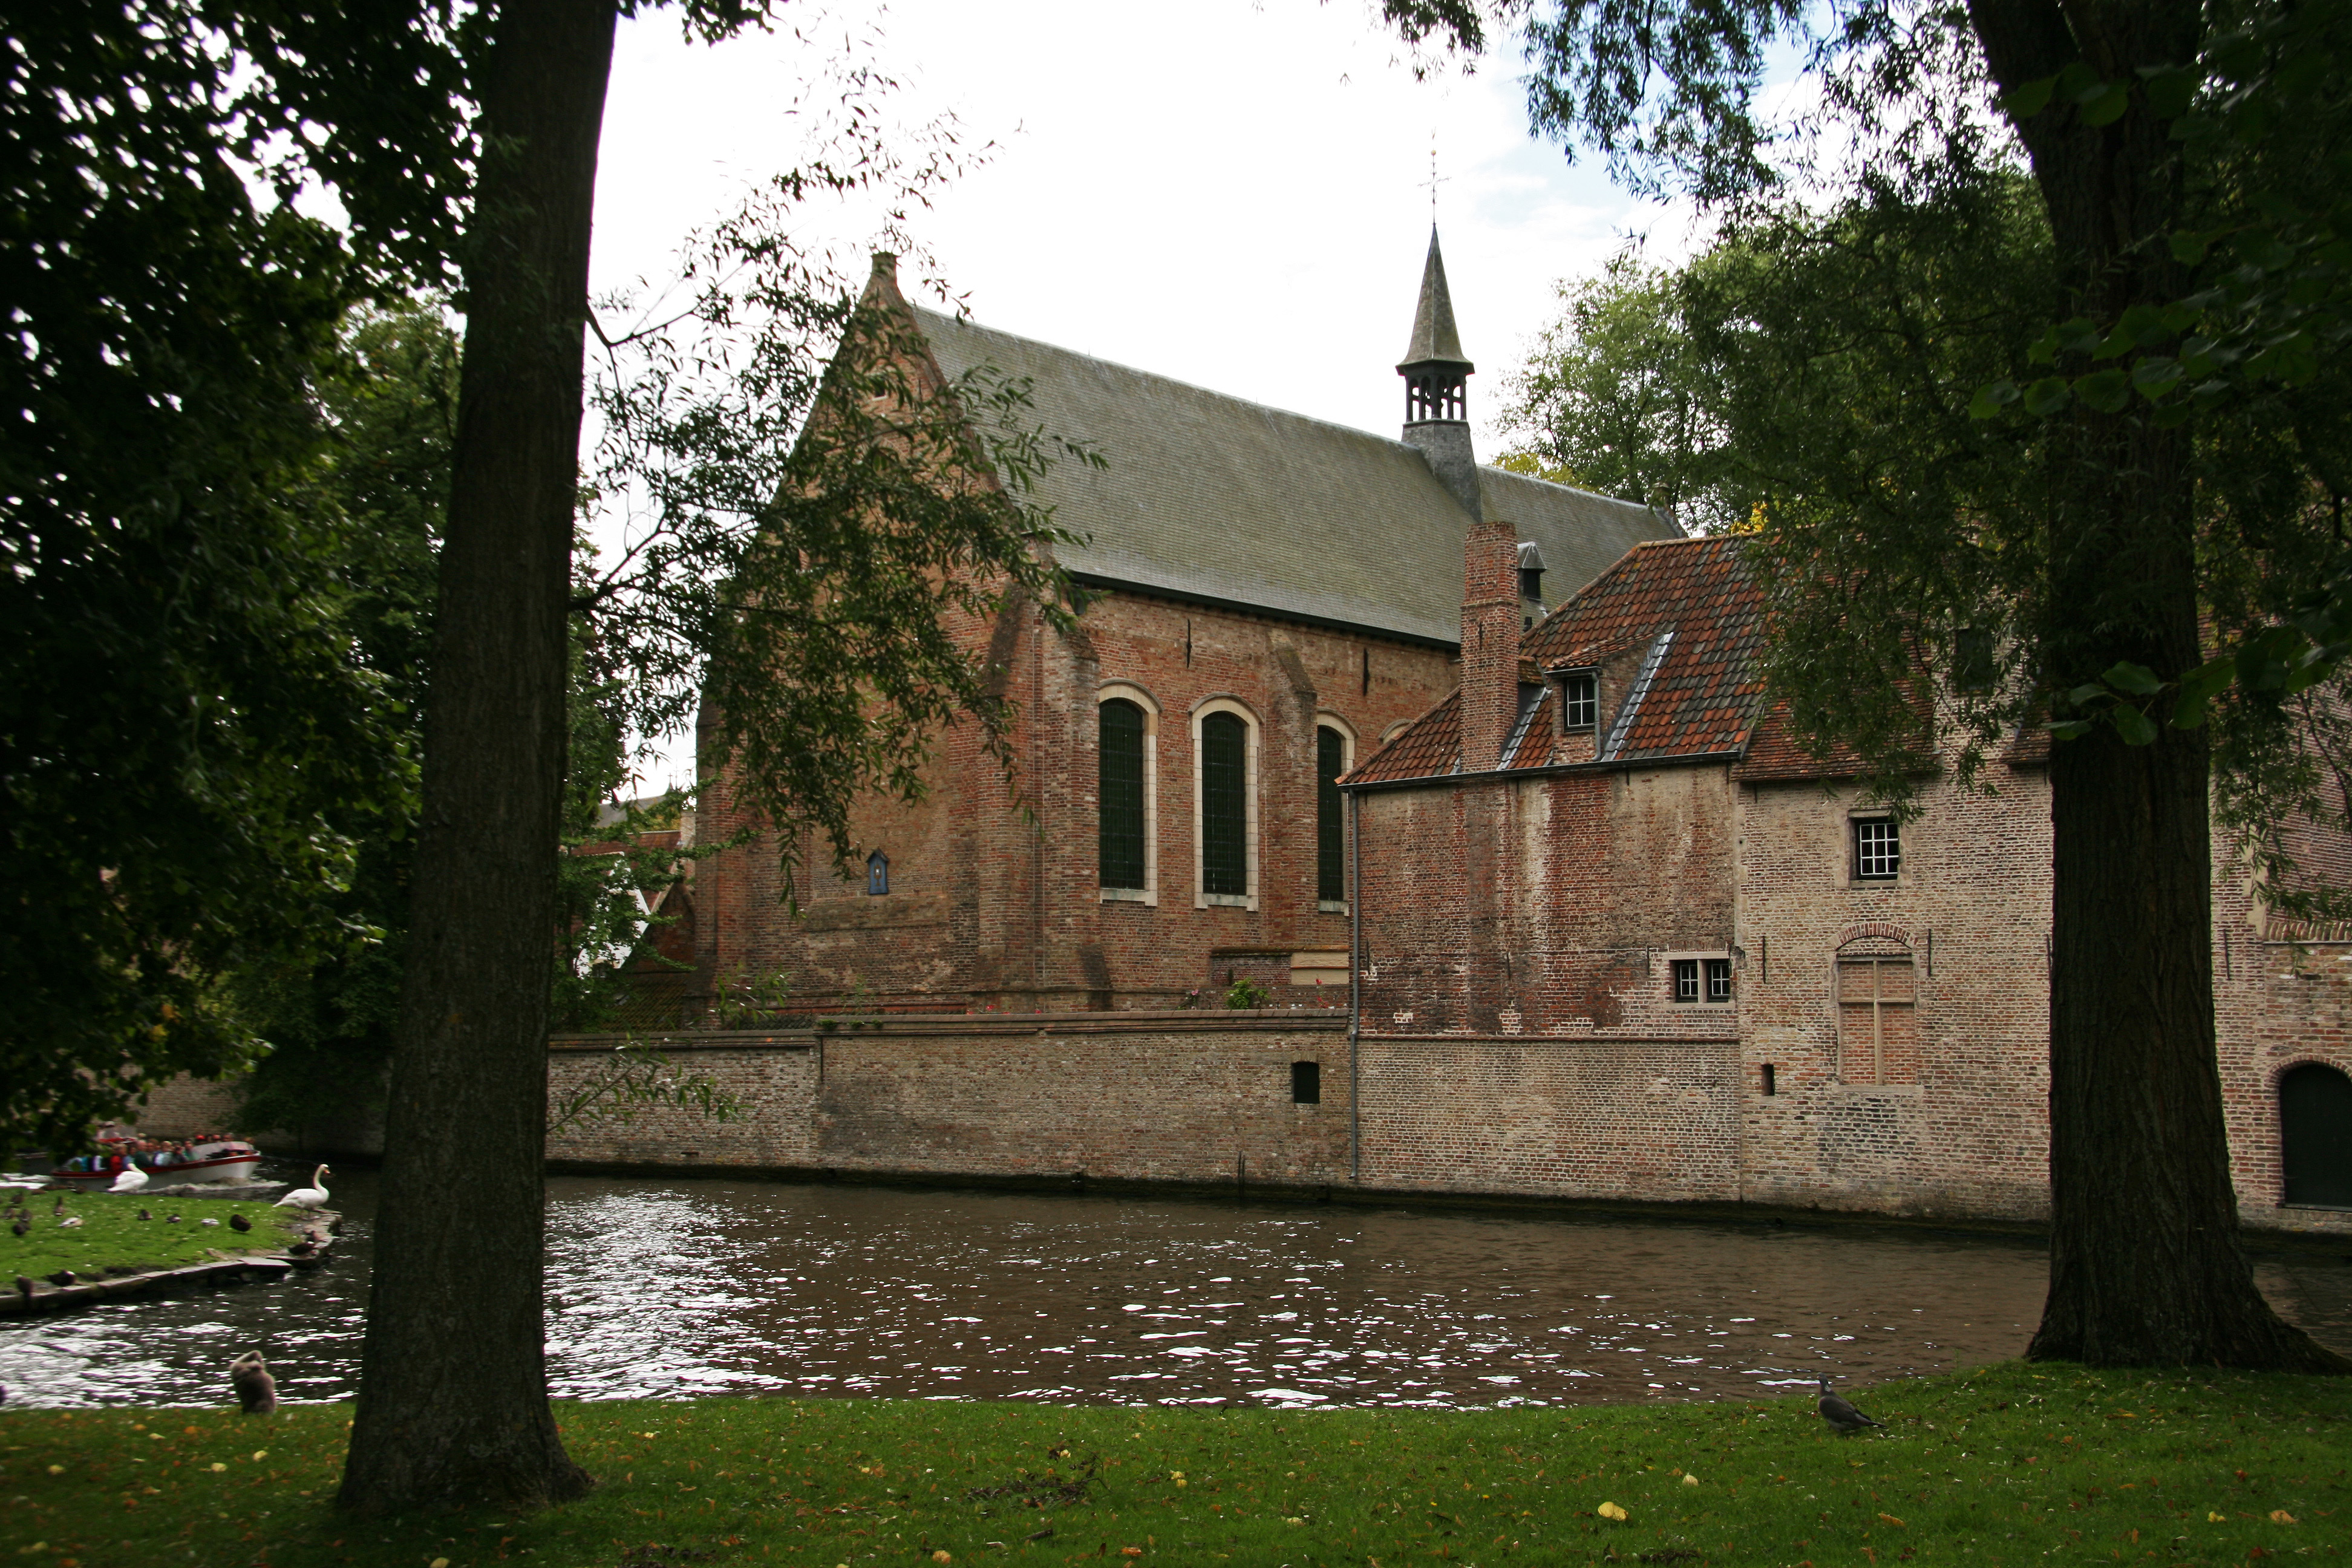 Waterside with the church of the béguinage in the back.